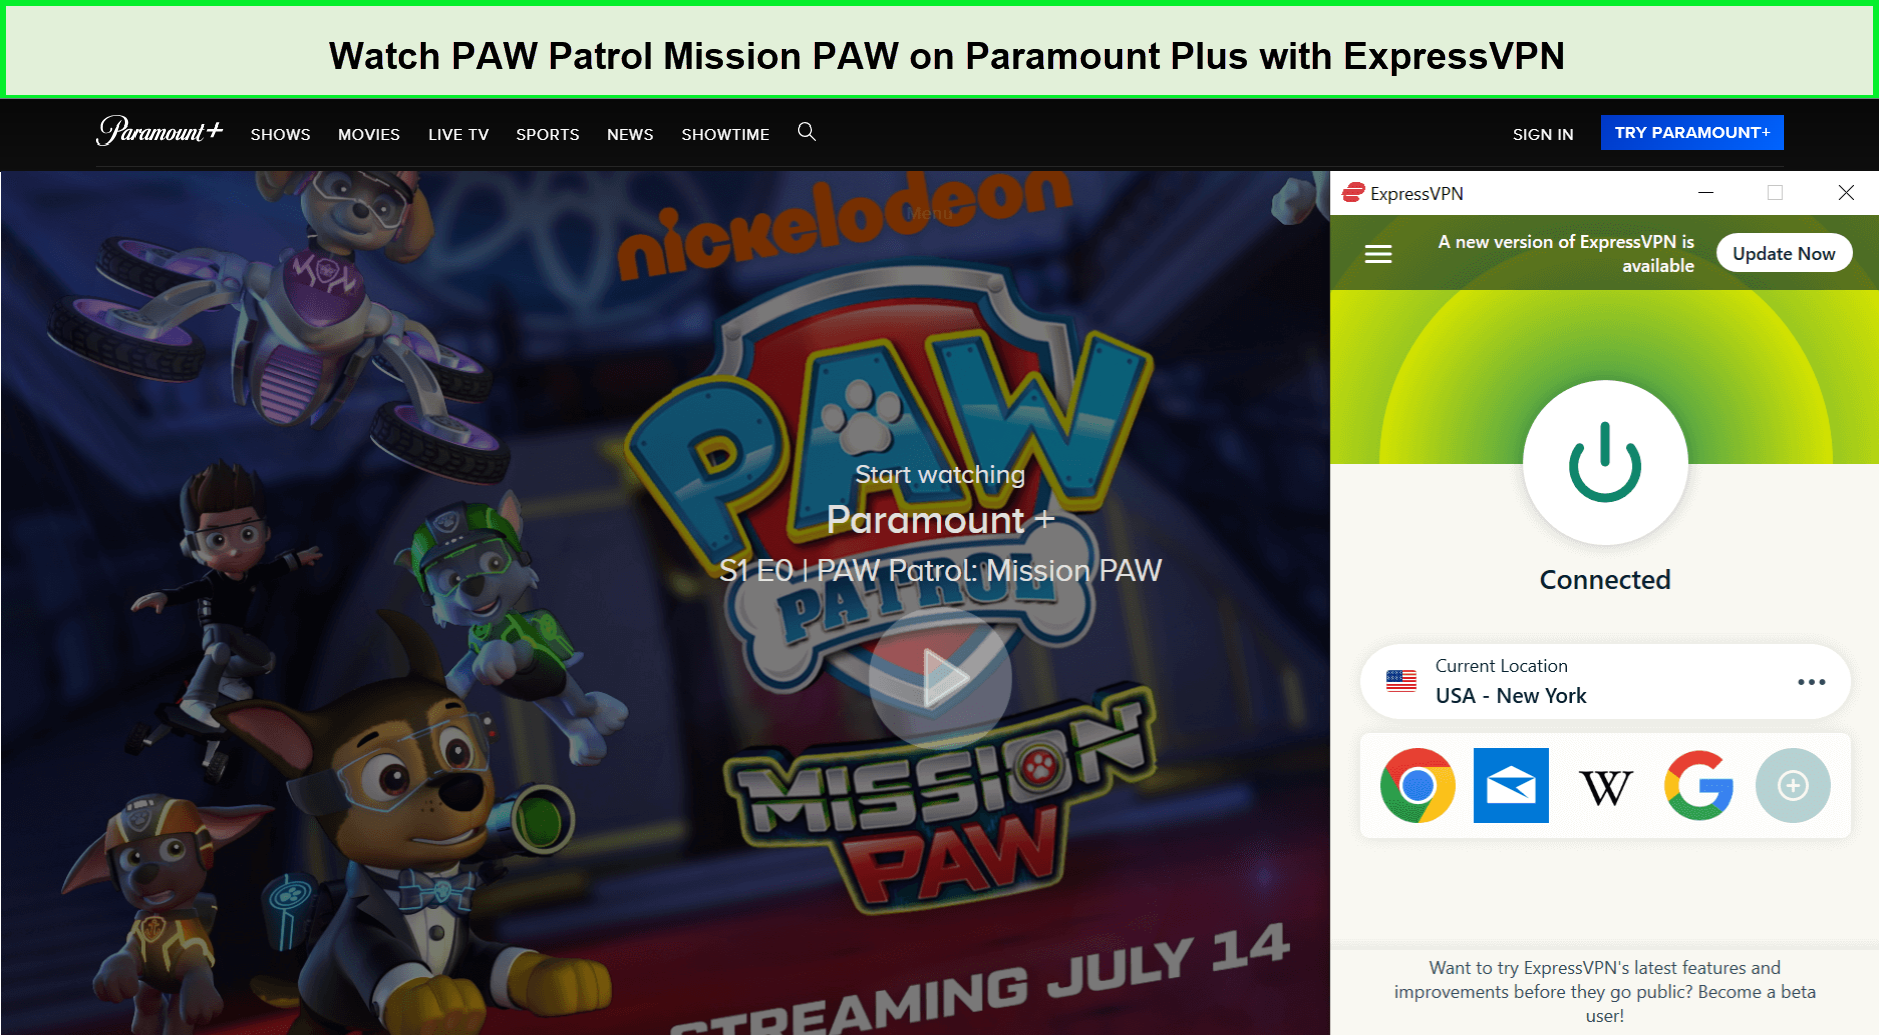 Watch-PAW-Patrol-Mission-PAW-outside-USA-on-Paramount-Plus-with-ExpressVPN